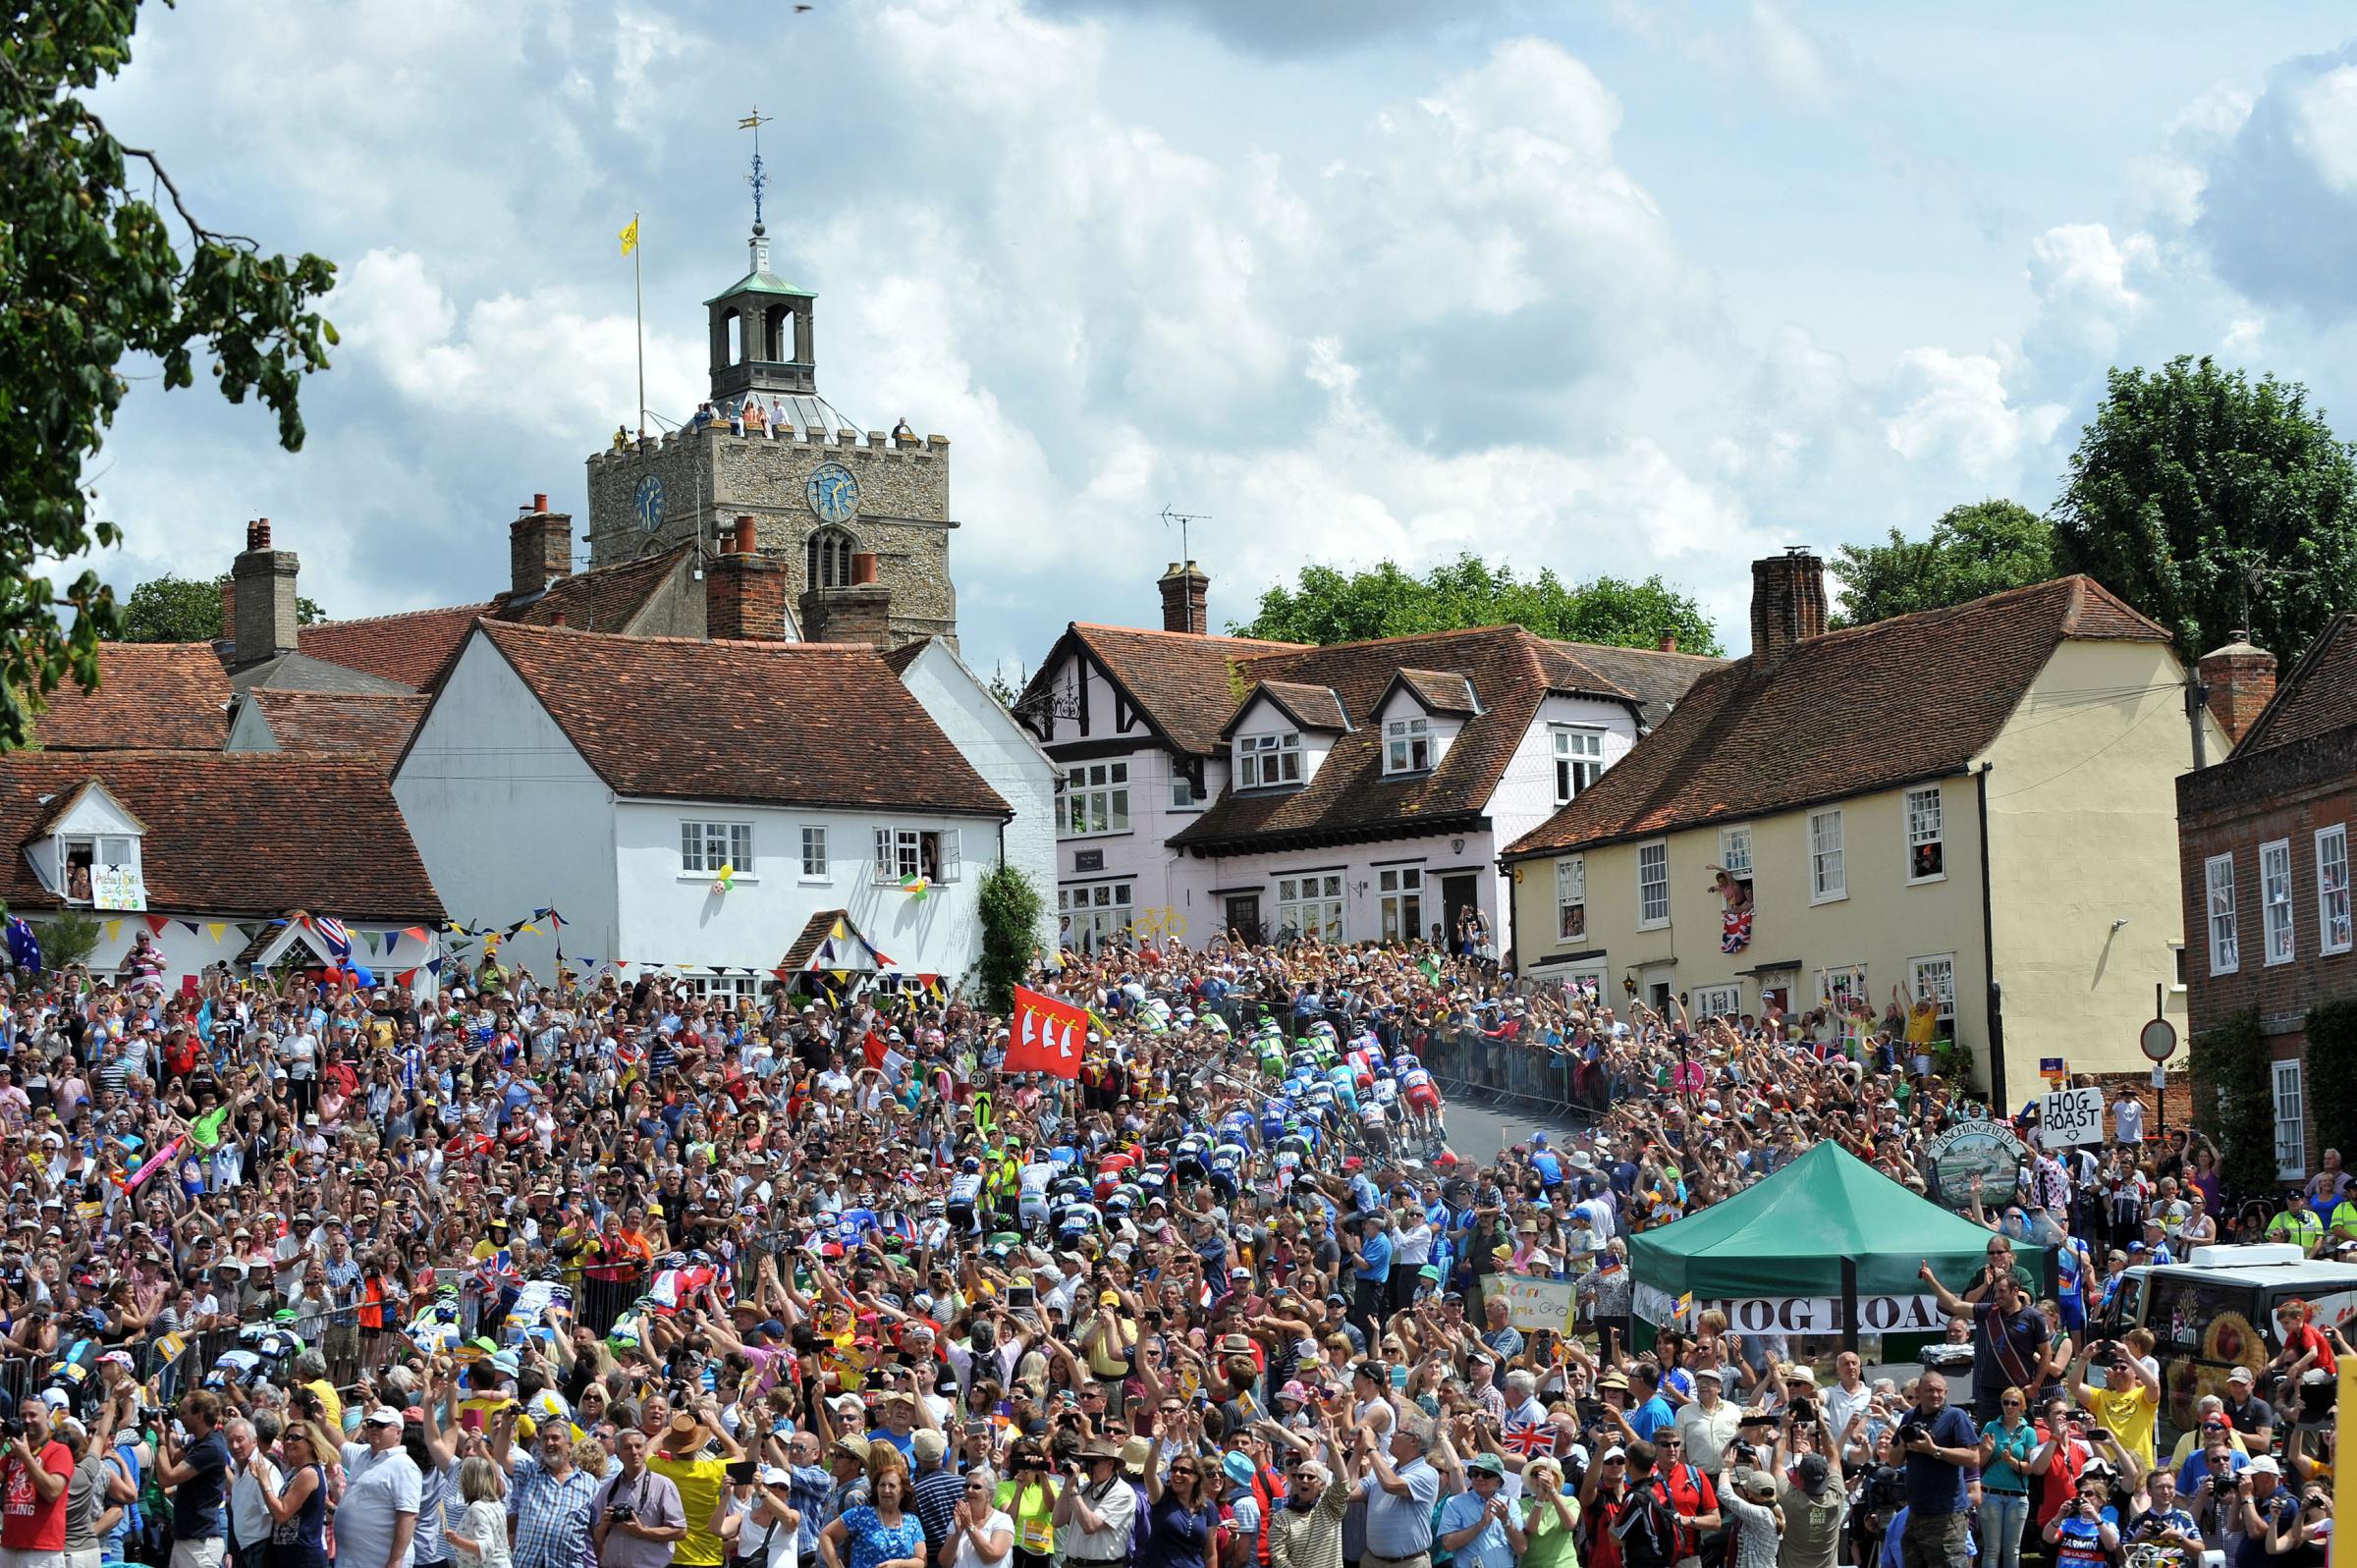 Riders make their way up the short climb in the village of Finchingfield in north Essex during stage three of the Tour de France from Cambridge to London on July 7, 2014.